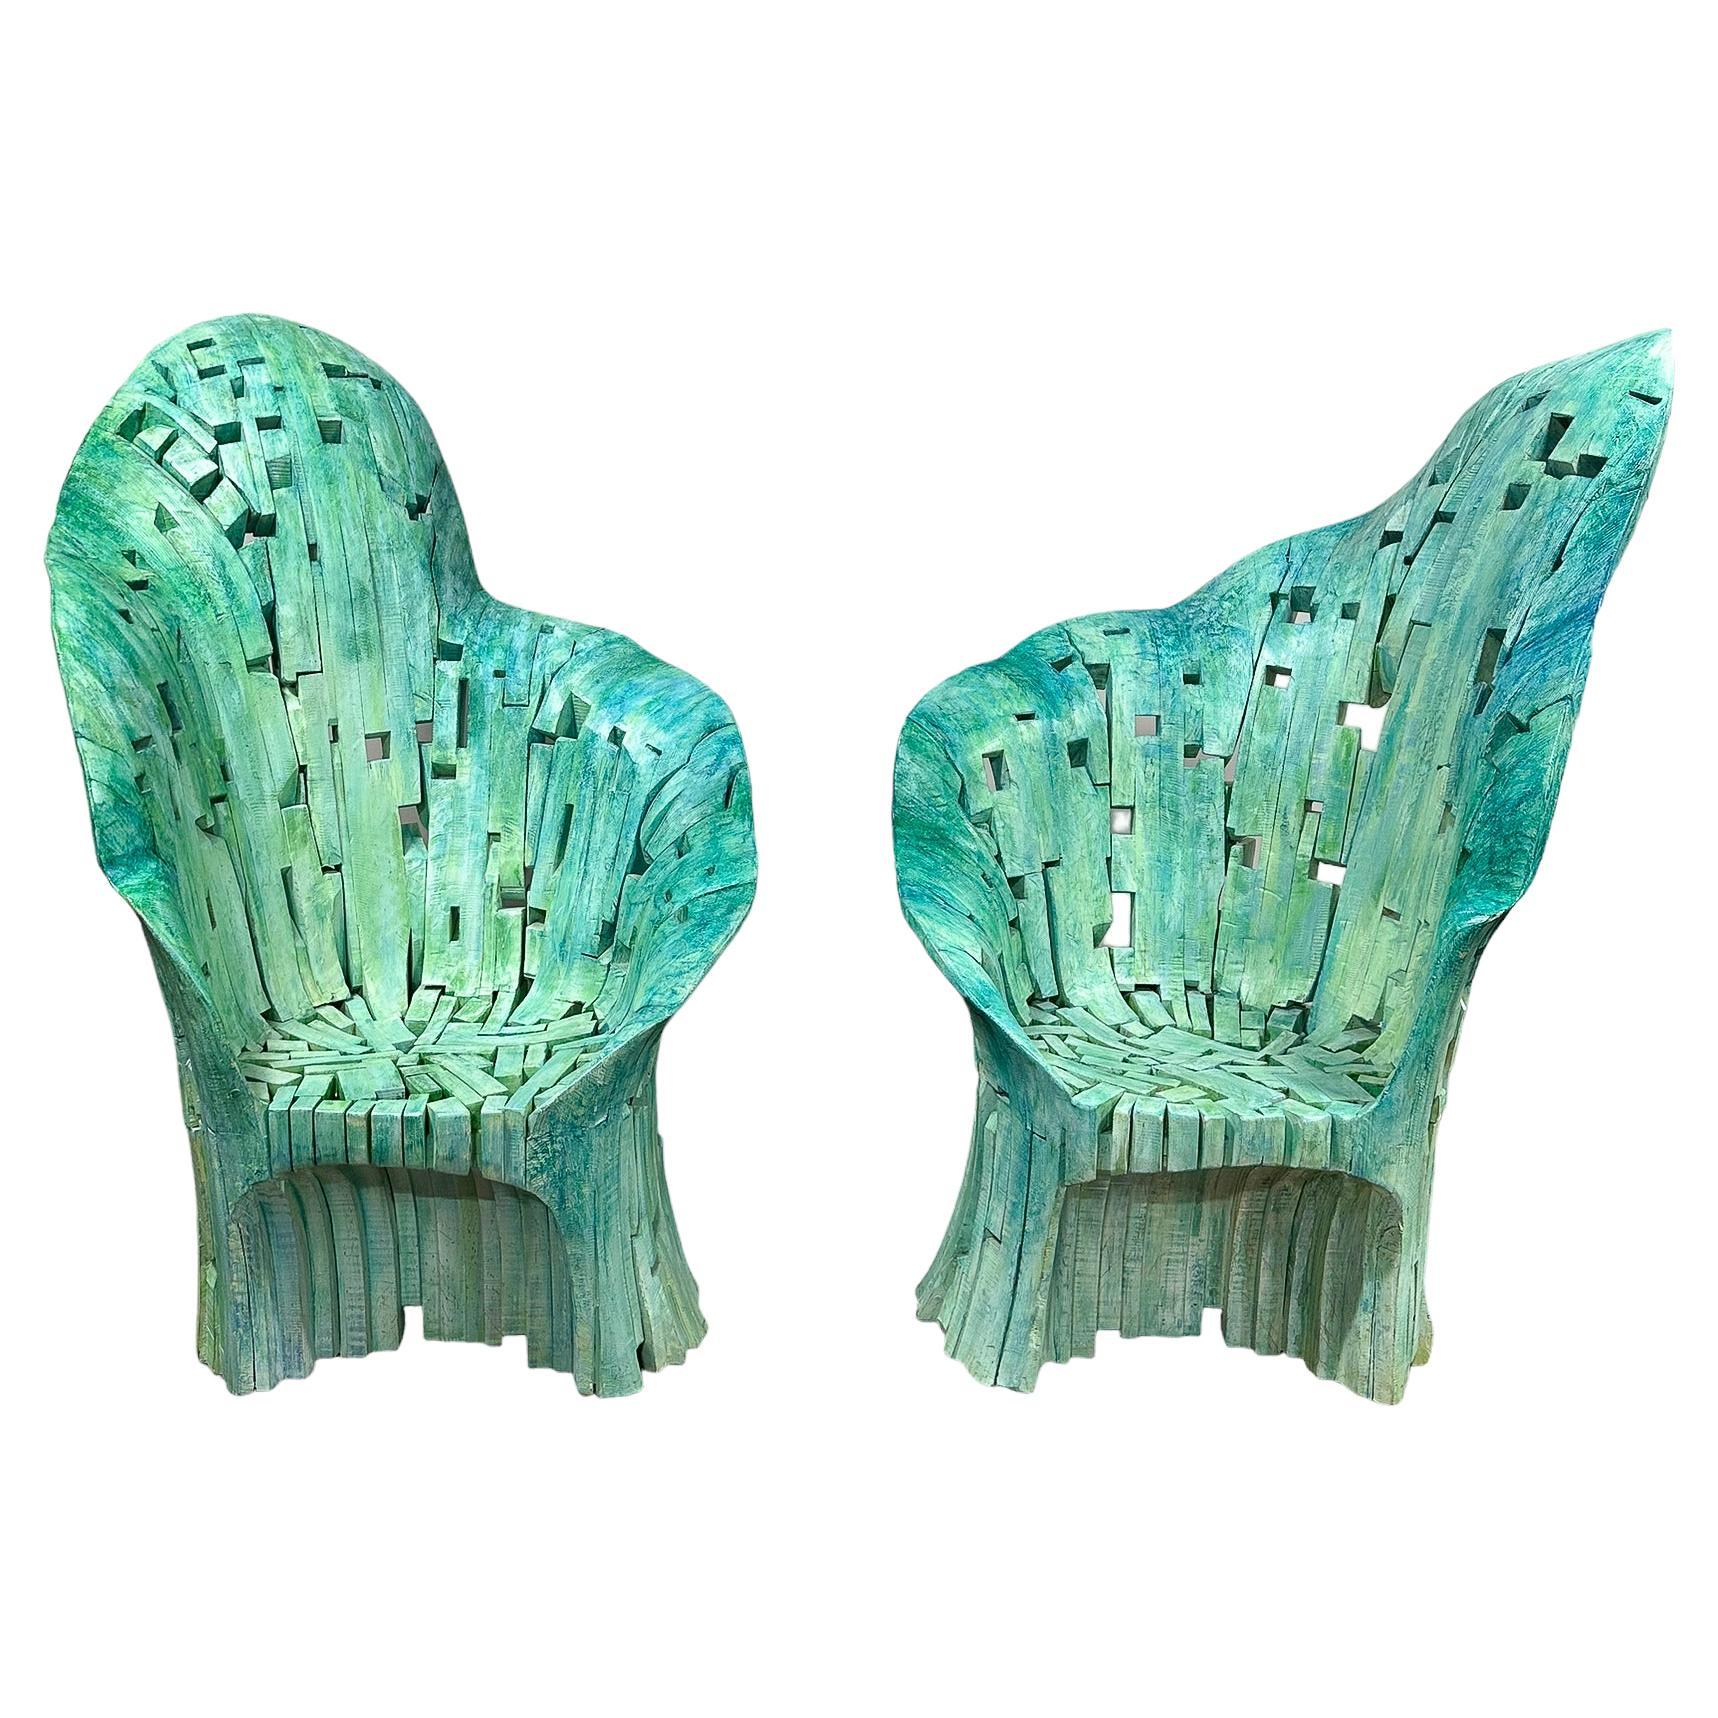 Yves Boucard Pair of Manu and Elle High Back Modern Whimsical Chairs, Swiss For Sale